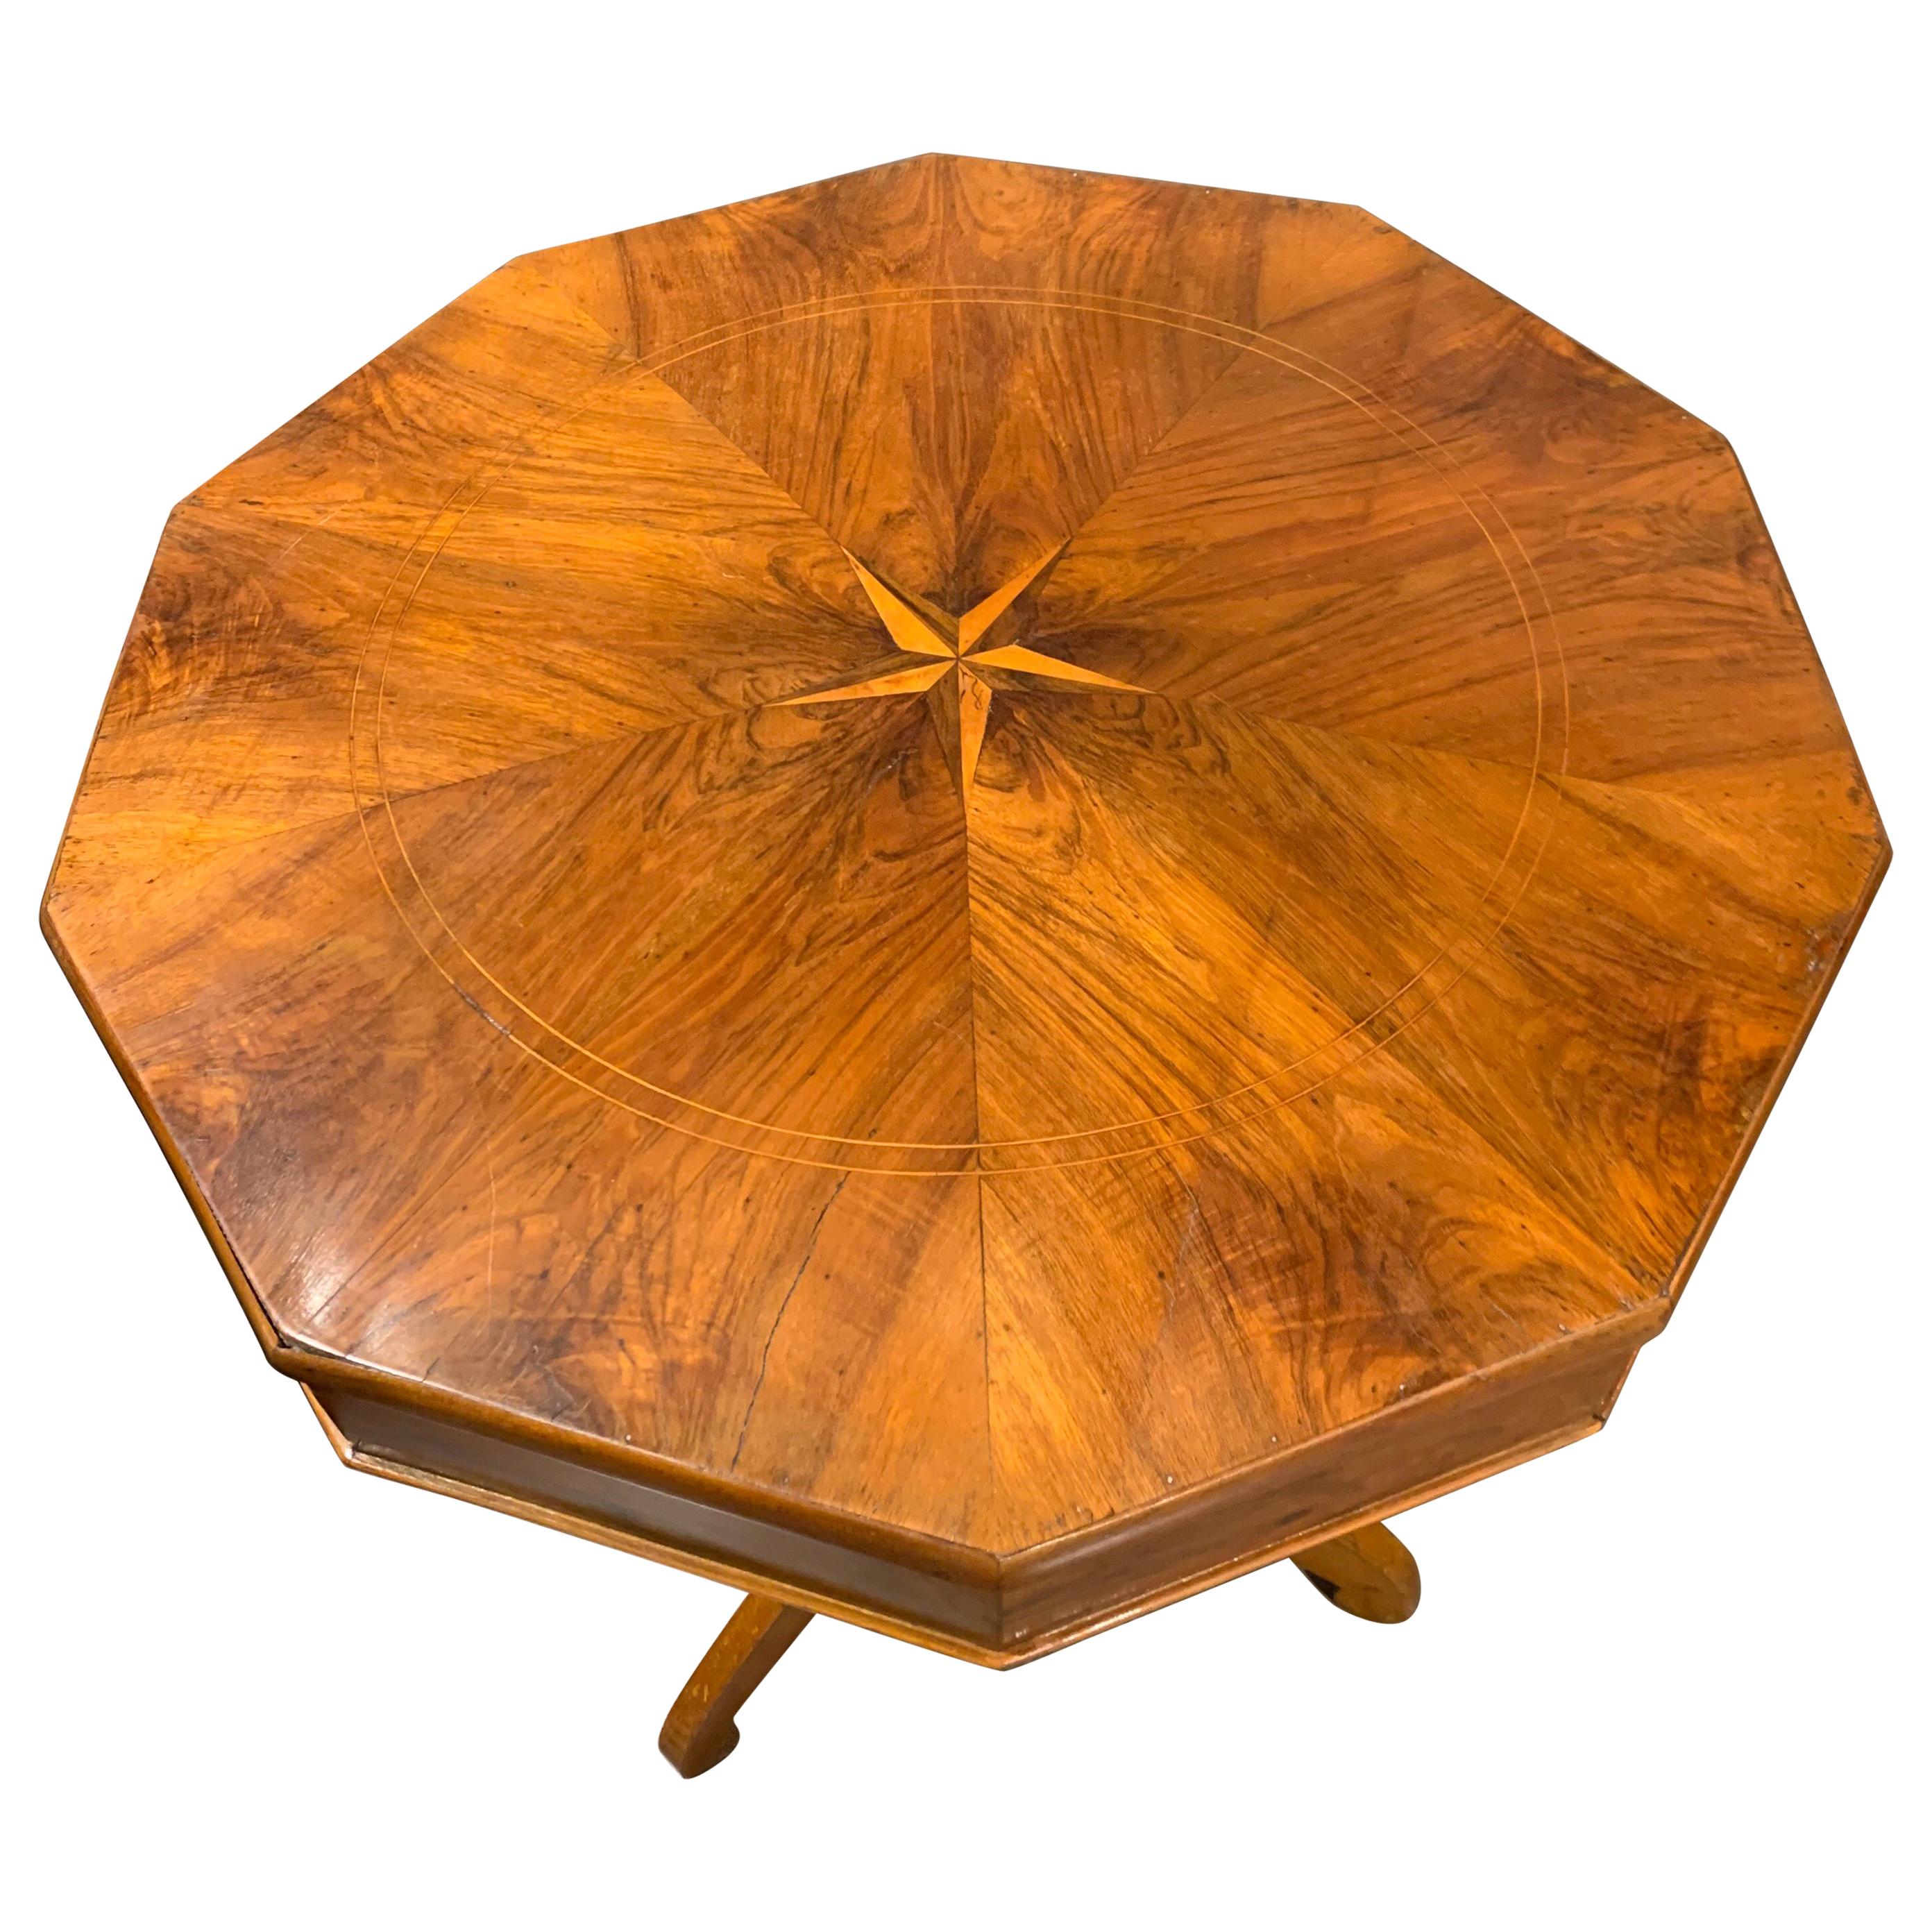 Beautiful 19th century Northern Italian walnut side table with star inlay. Very fine finish on this marvelous table!